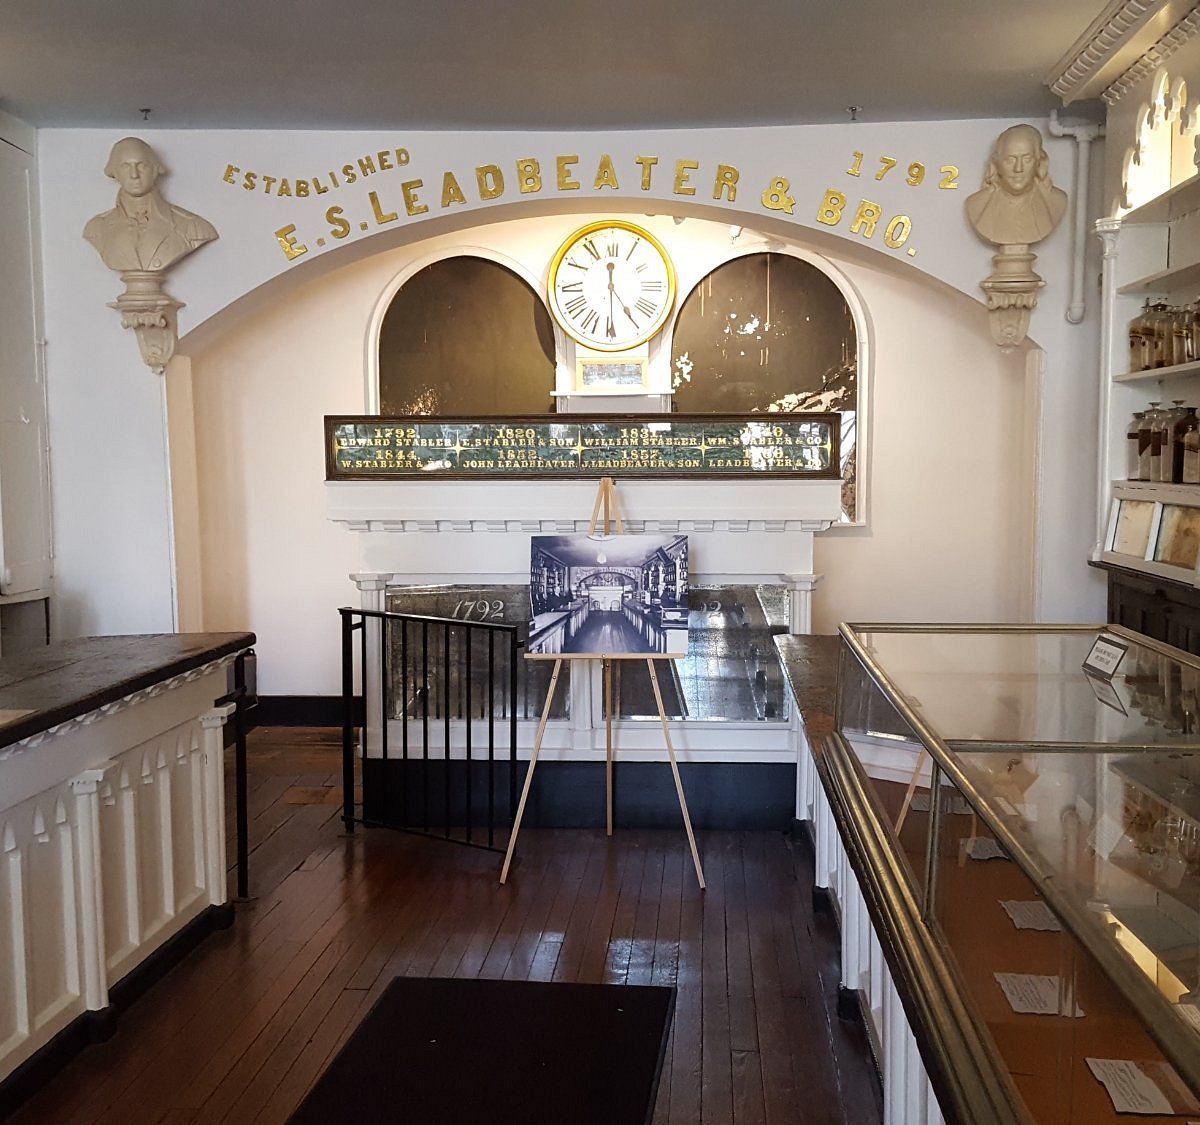 Stabler-Leadbeater Apothecary Museum - All You Need to Know BEFORE You Go  (with Photos)